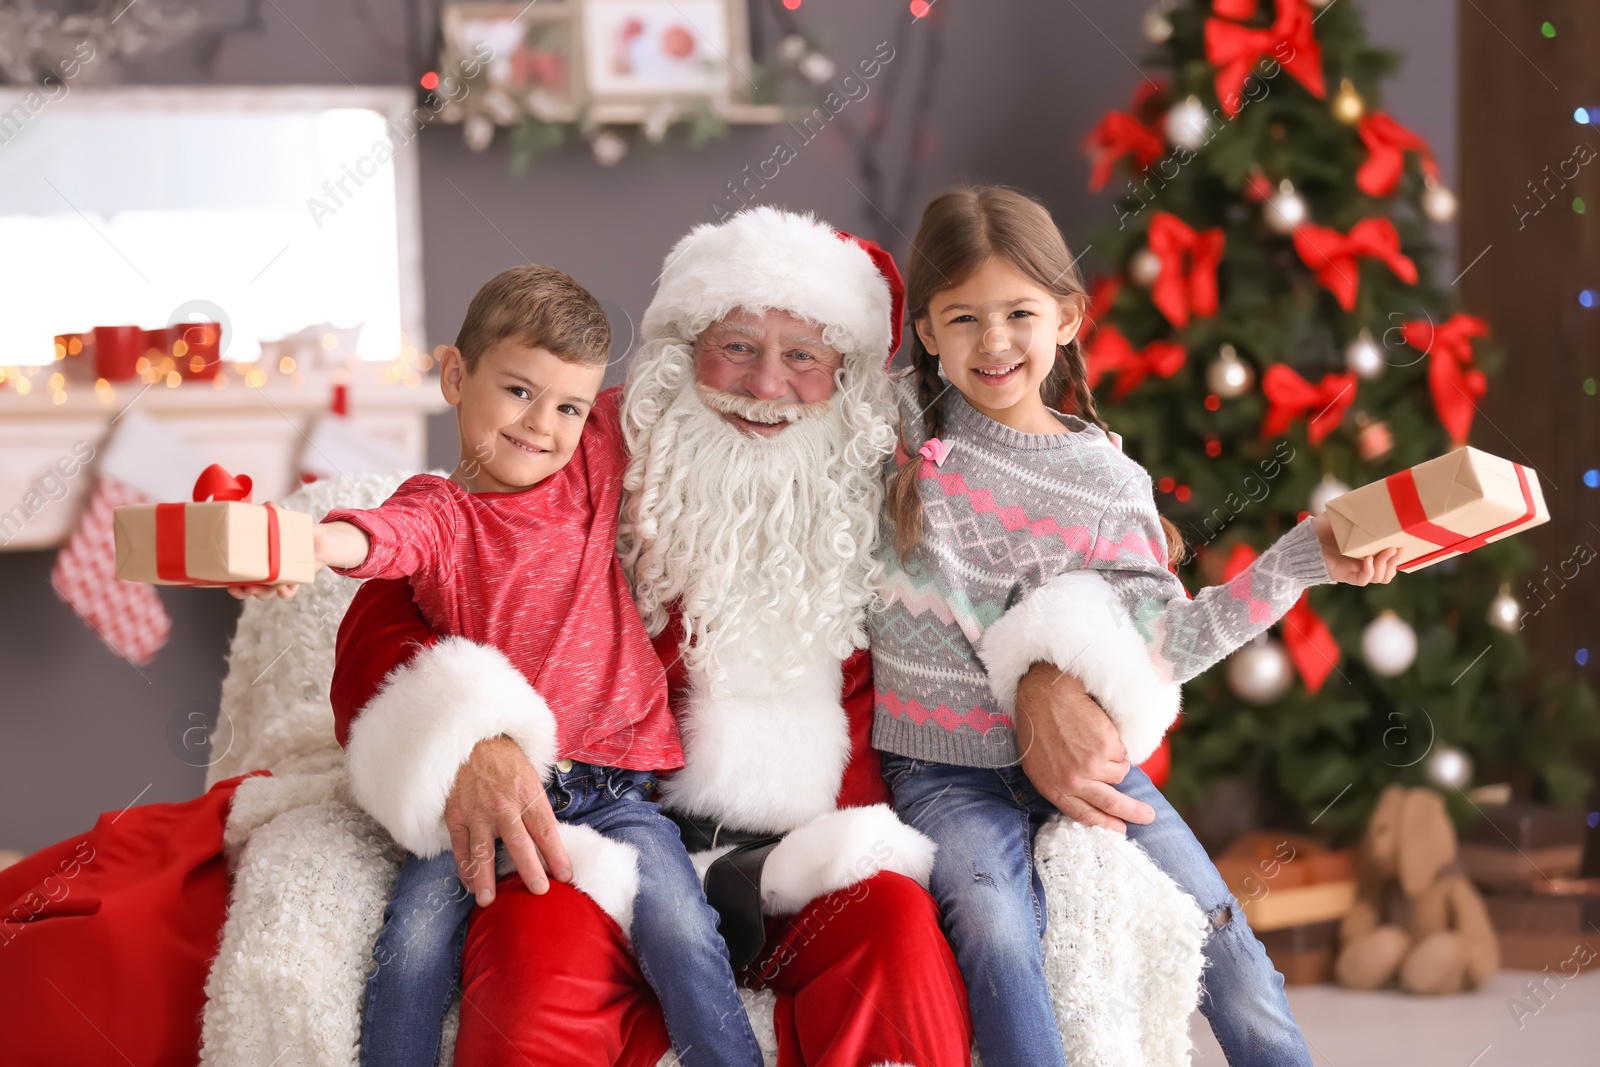 Photo of Little children with gift boxes sitting on authentic Santa Claus' knees indoors